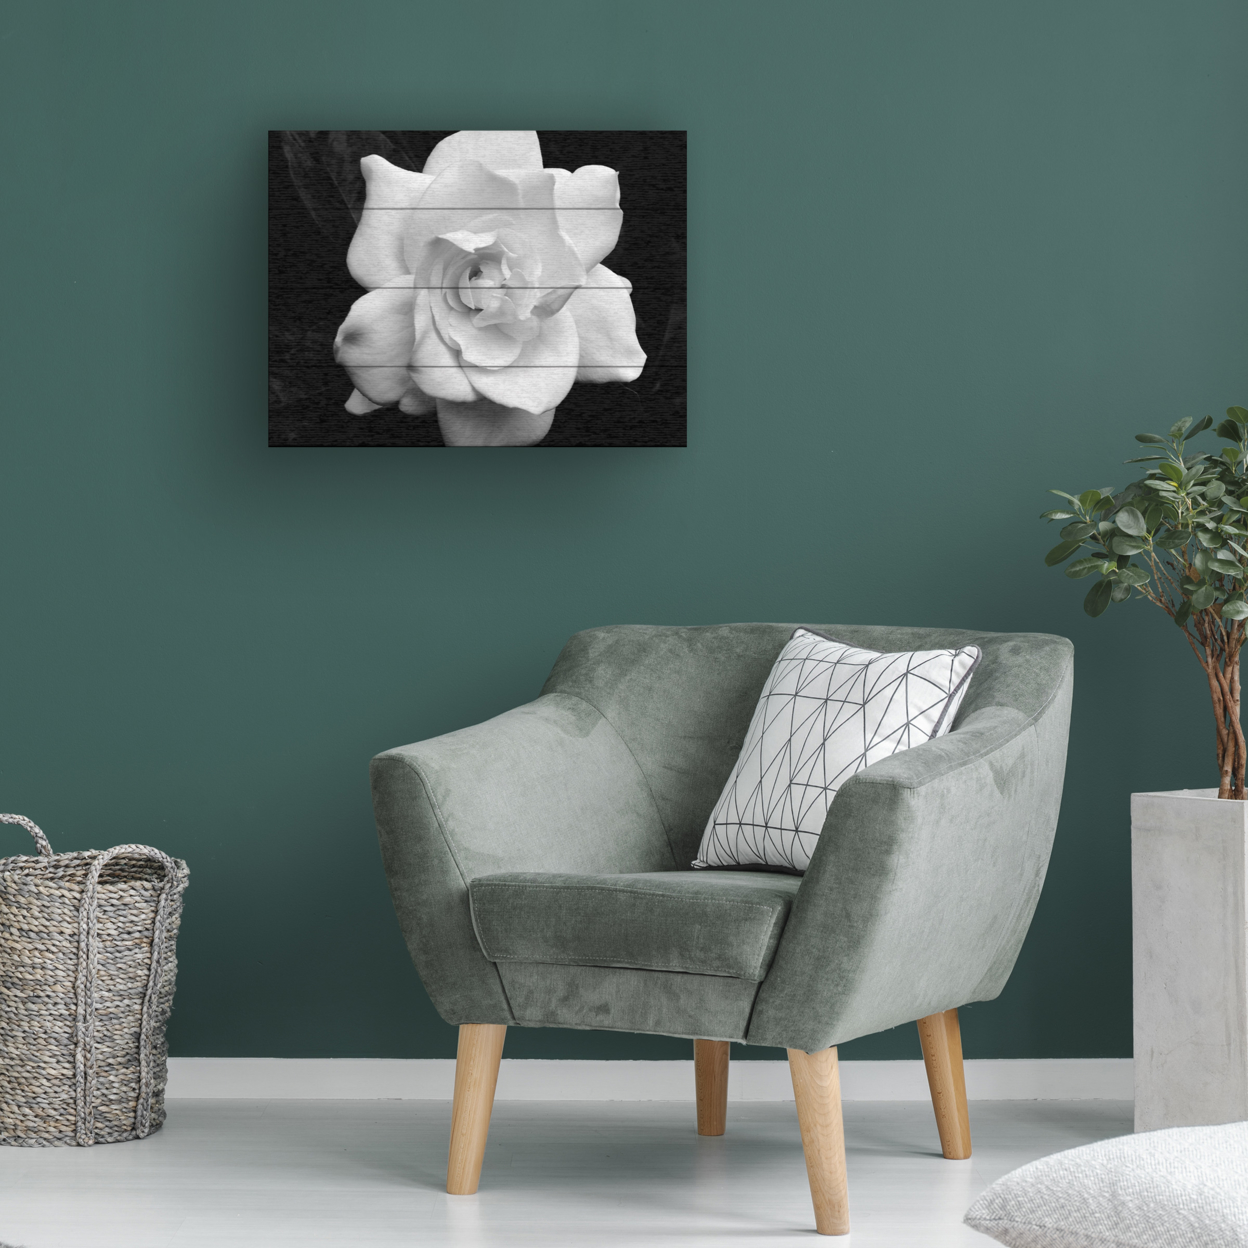 Wall Art 12 X 16 Inches Titled Gardenia In Black And White Ready To Hang Printed On Wooden Planks